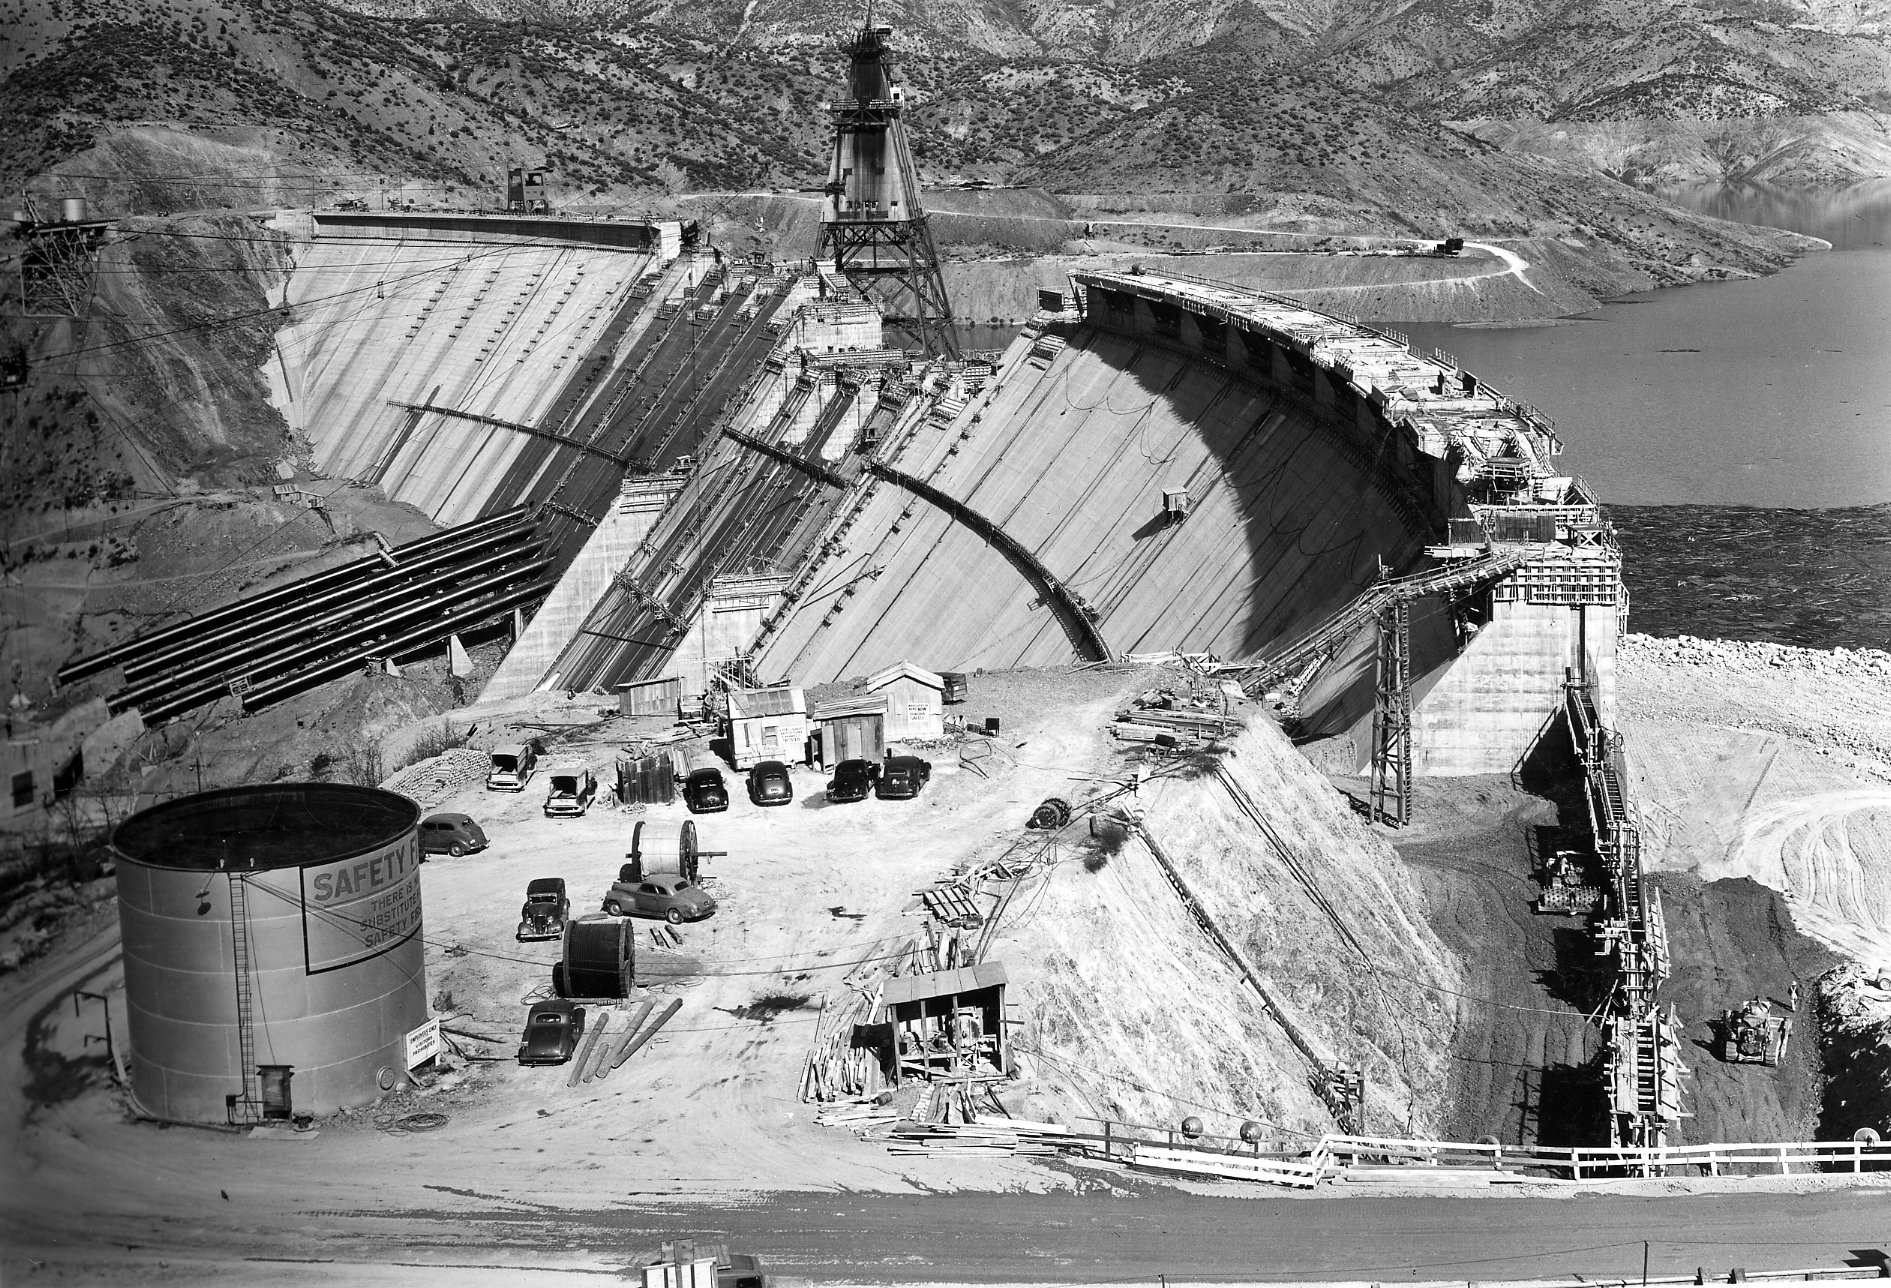  Shasta County — At the time of its construction, Shasta Dam was the second largest concrete dam in the country, built with 15 million tons of concrete. March 16, 1944.  P.E. Norine/U.S. Bureau of Reclamation 